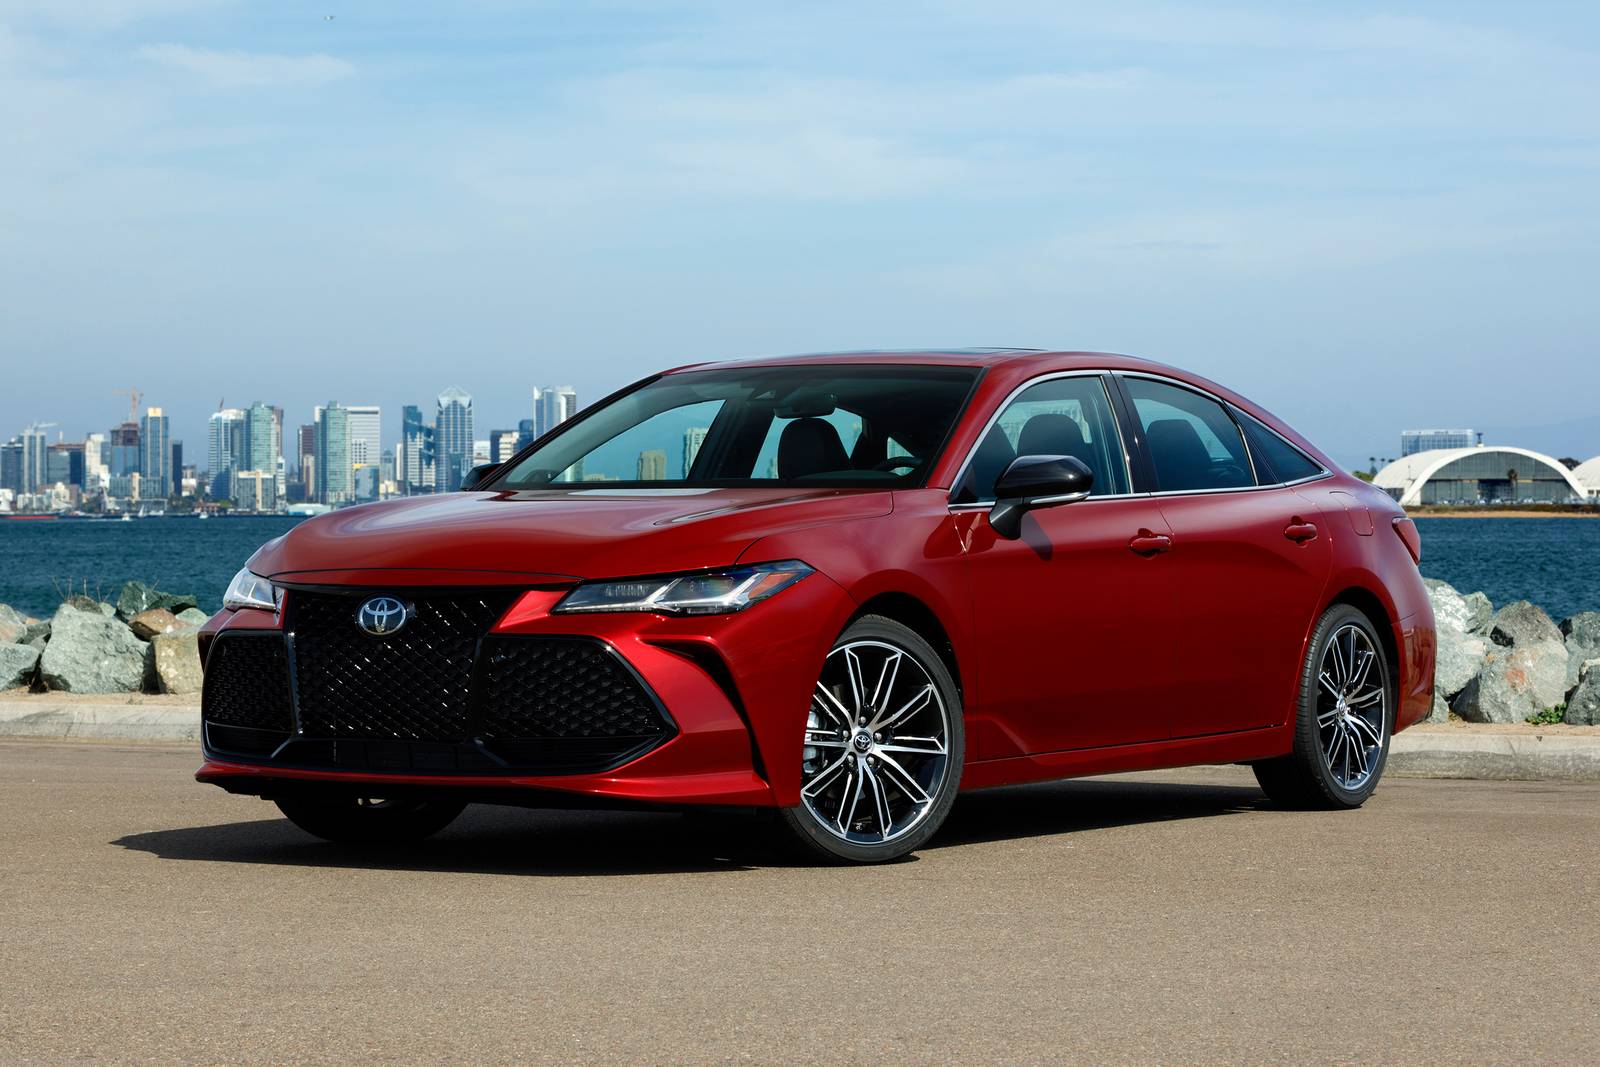 2019 Toyota Avalon Review & Ratings | Edmunds